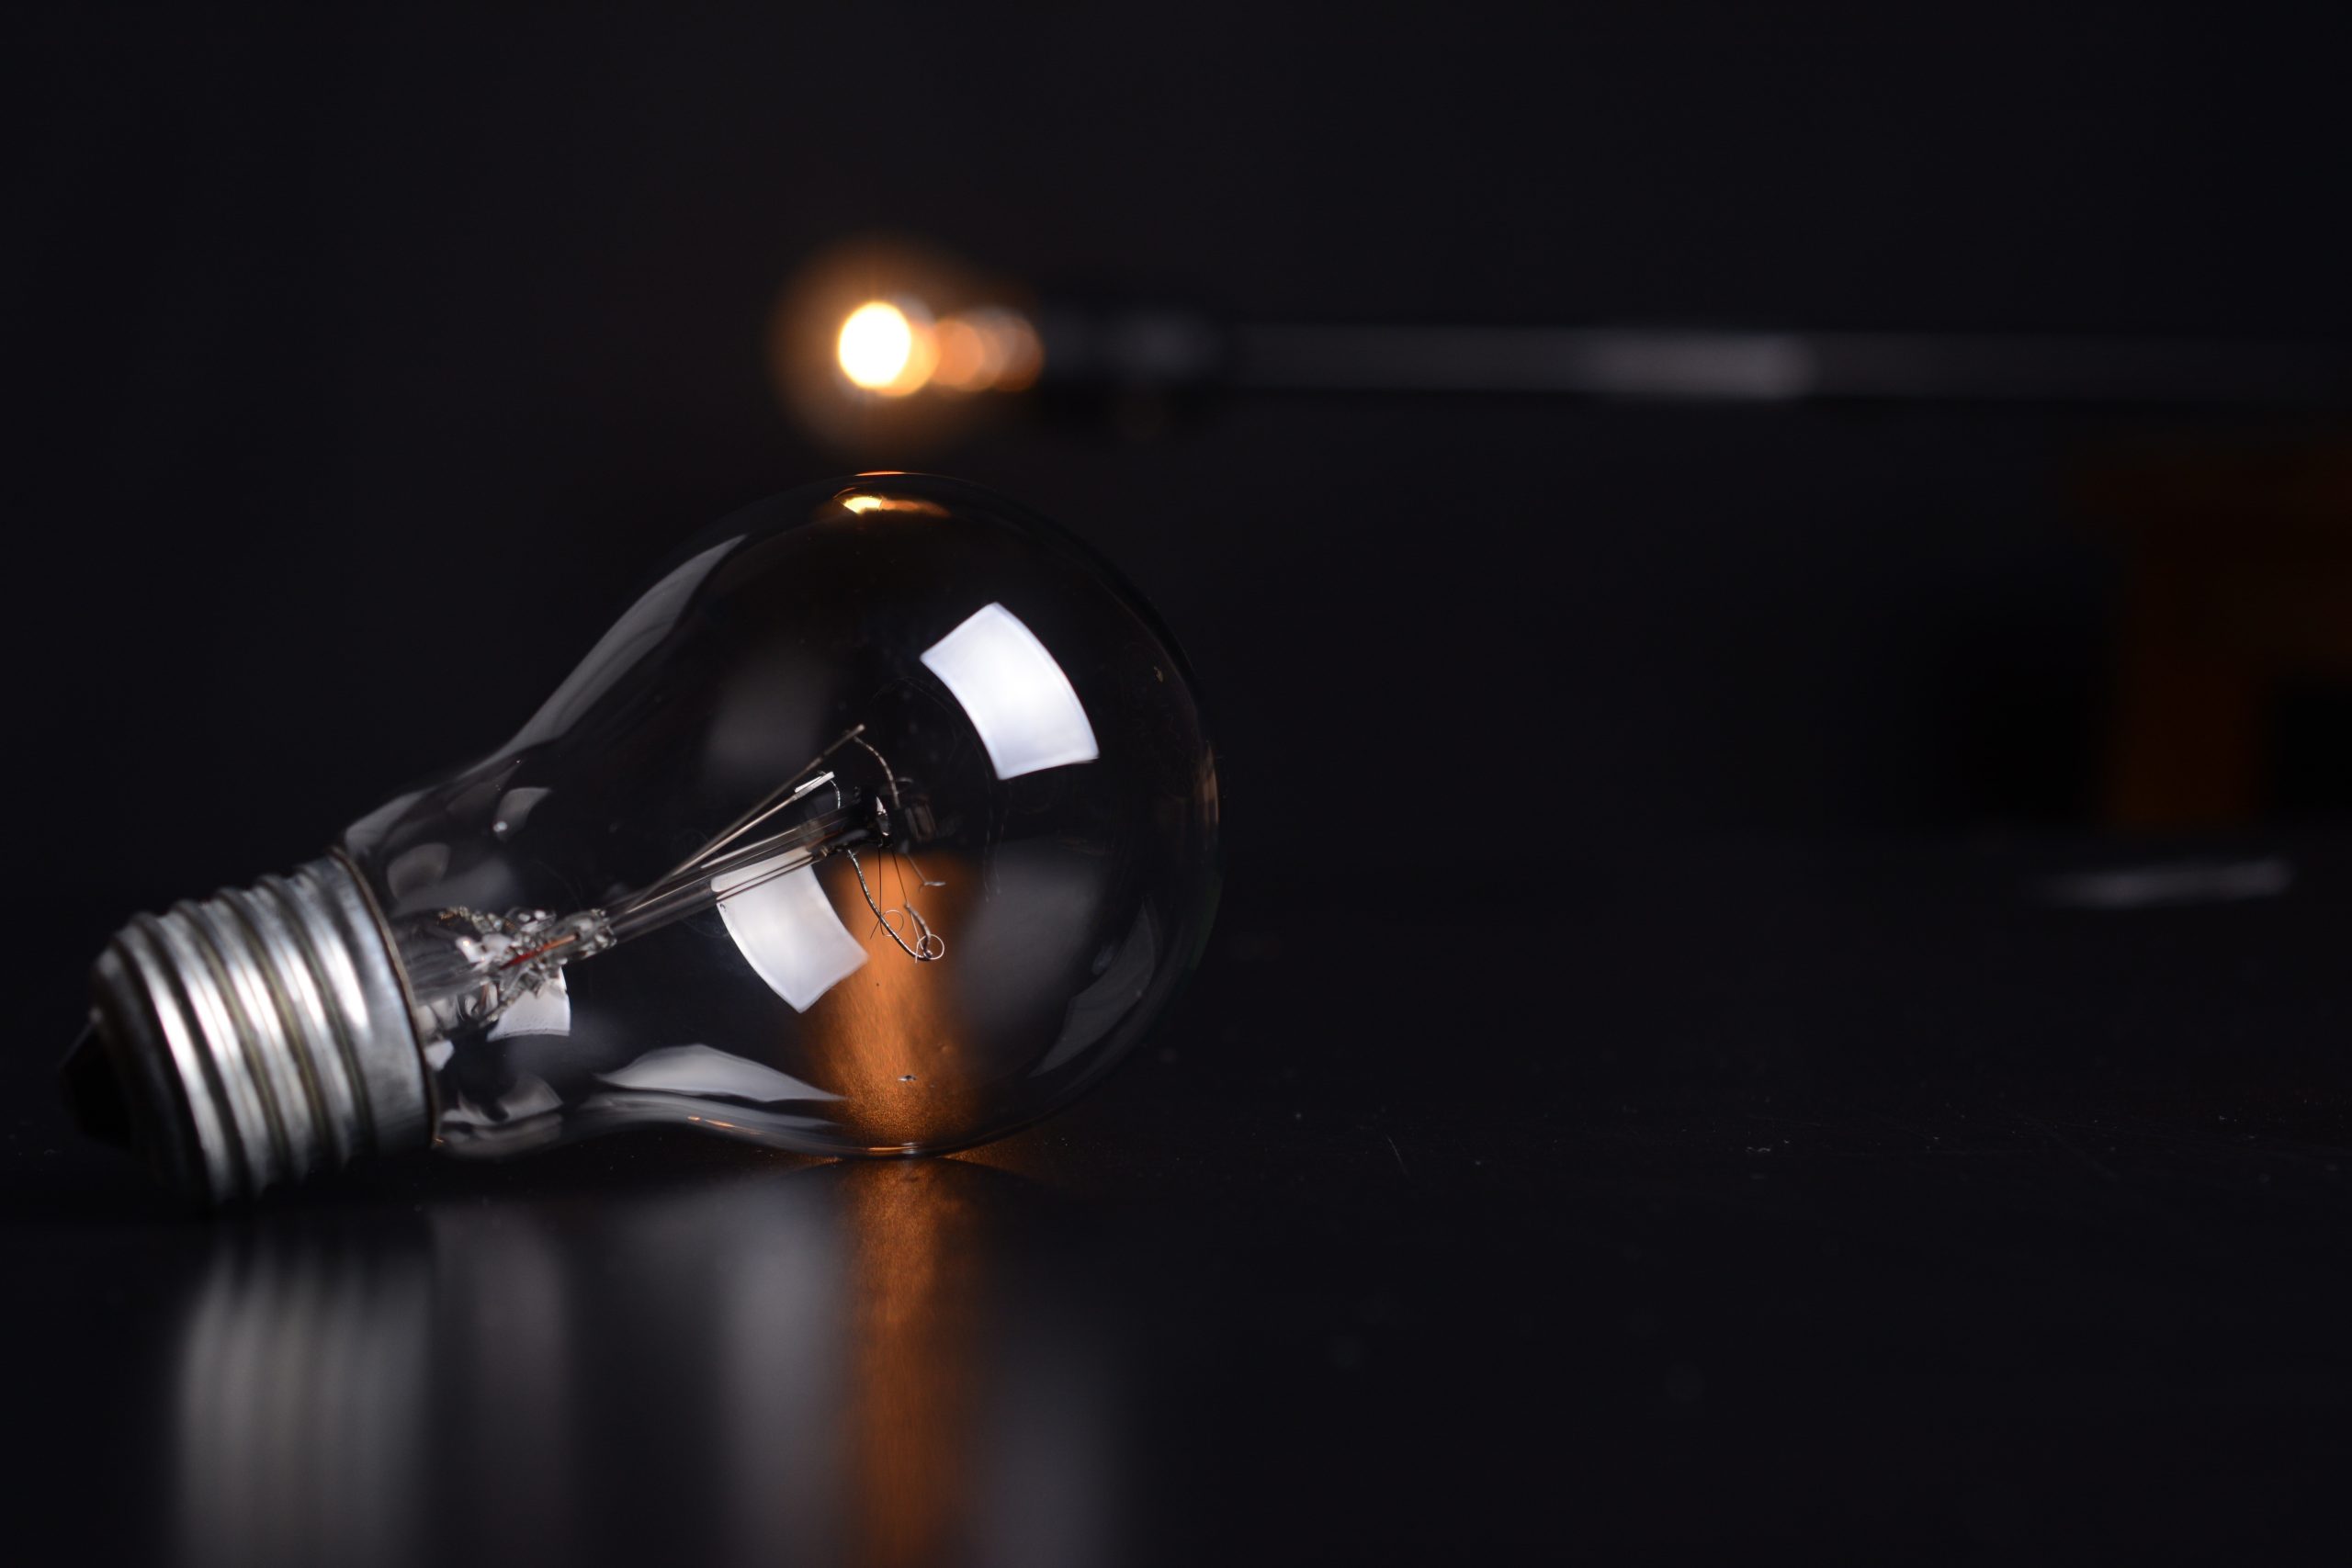 A bulb placed on the table.